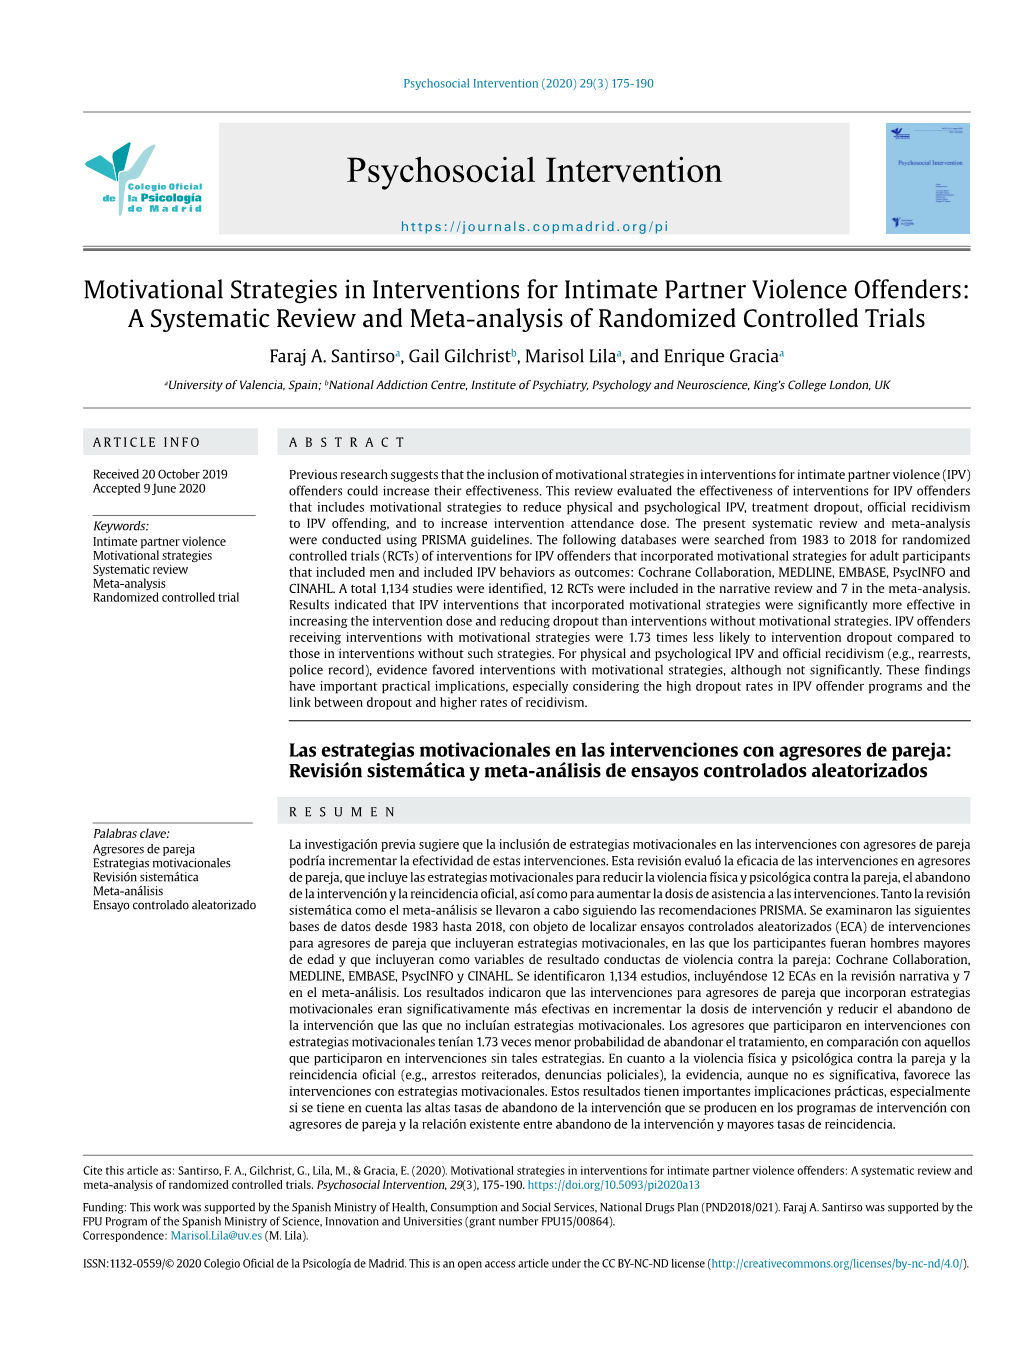 Motivational Strategies in Interventions for Intimate Partner Violence Offenders: a Systematic Review and Meta-Analysis of Randomized Controlled Trials Faraj A